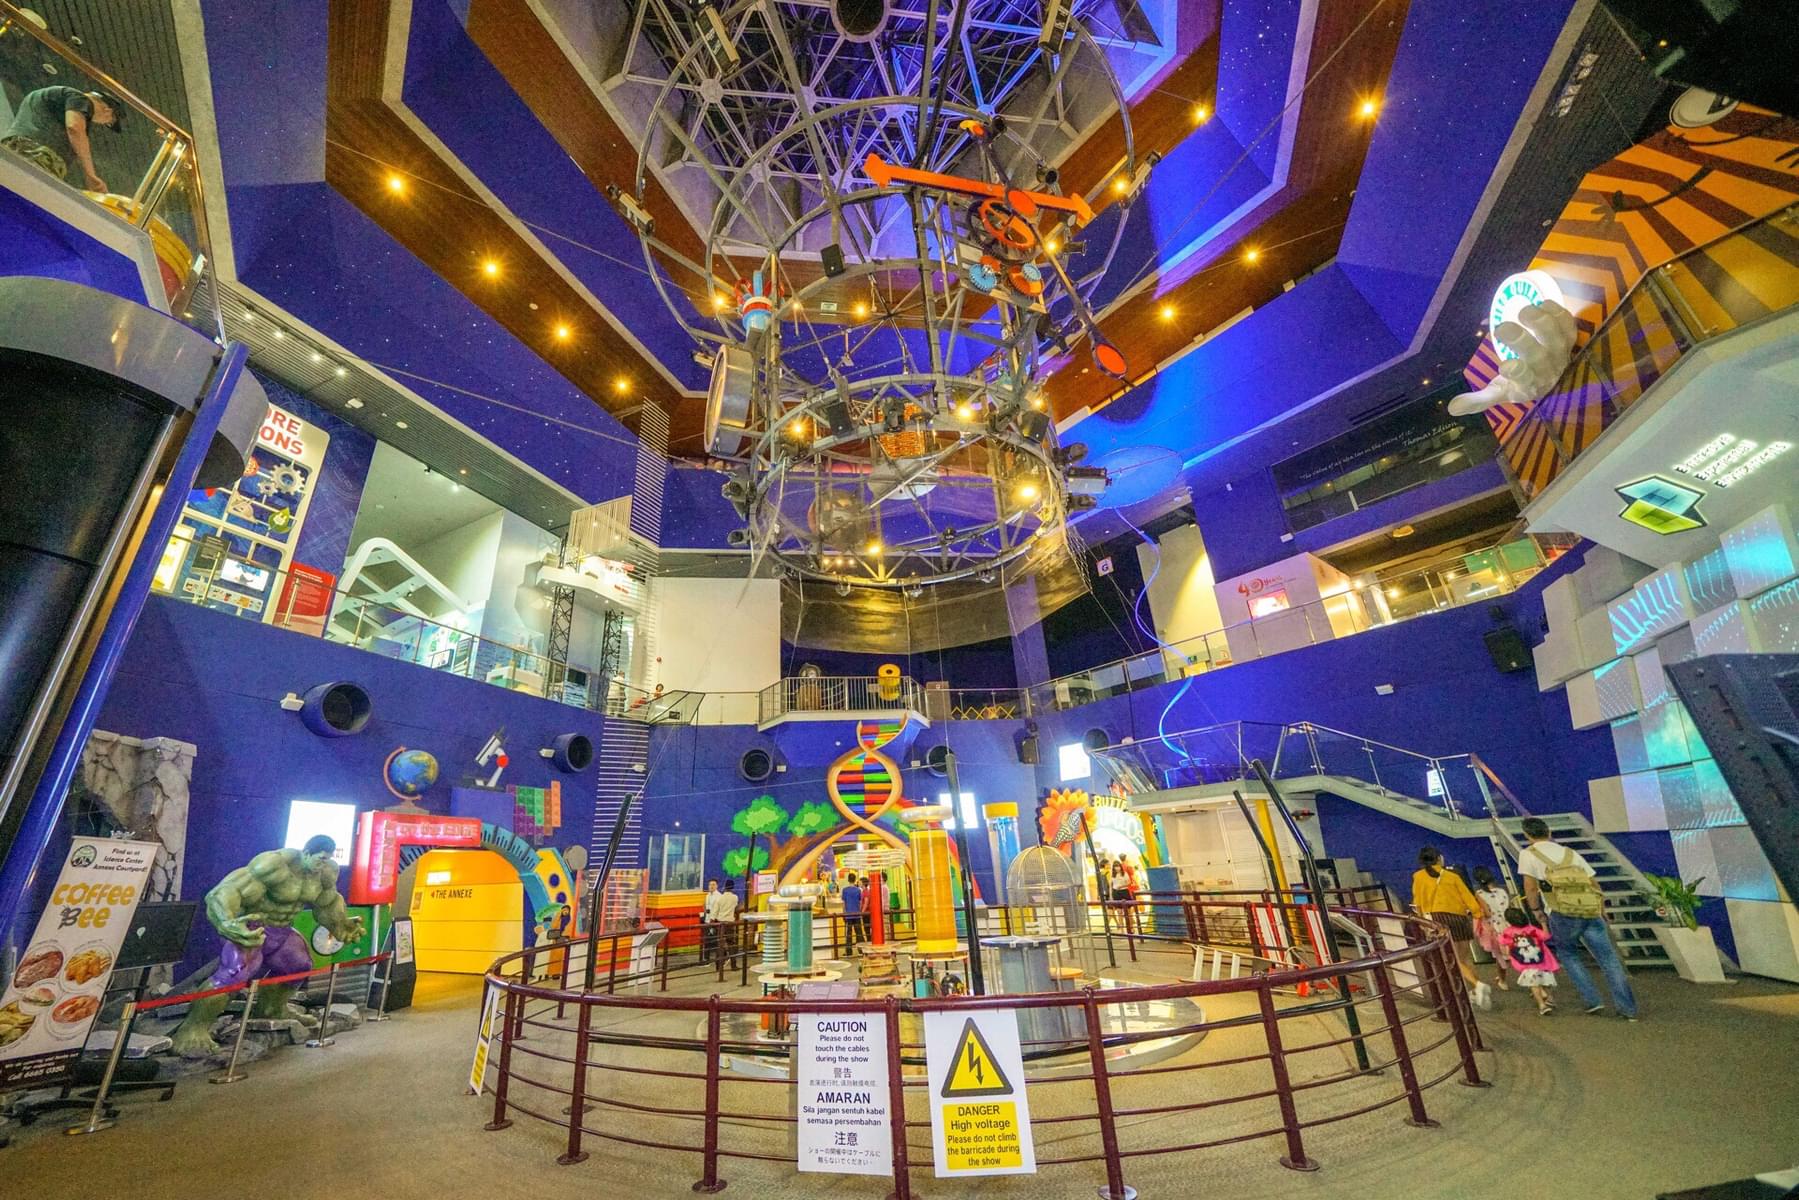 Bring out your inner scientist and explore the wonders of the Singapore Science Centre